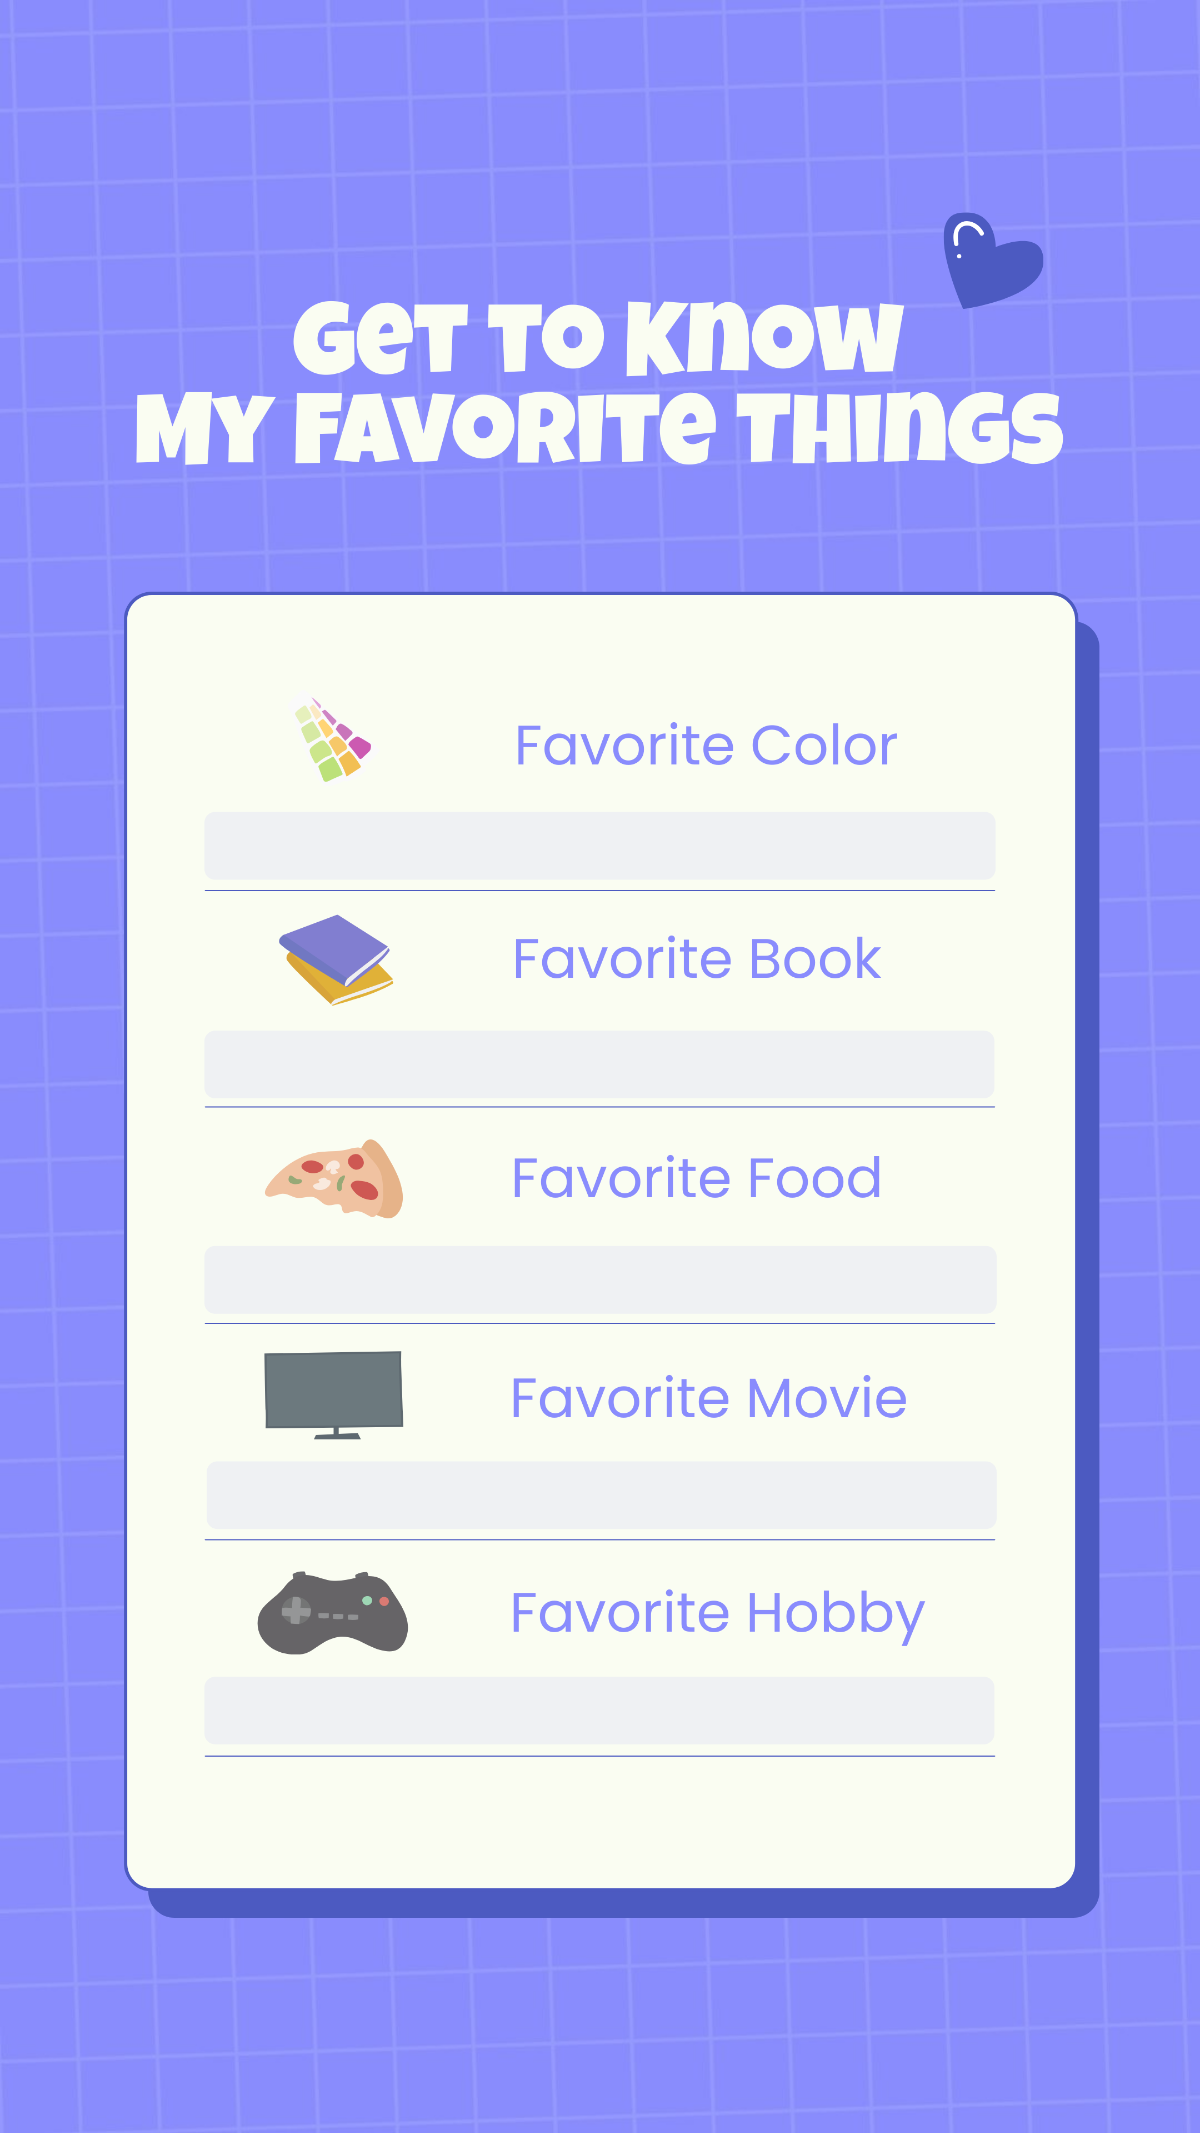 Get to Know My Favorite Things Instagram Post Template